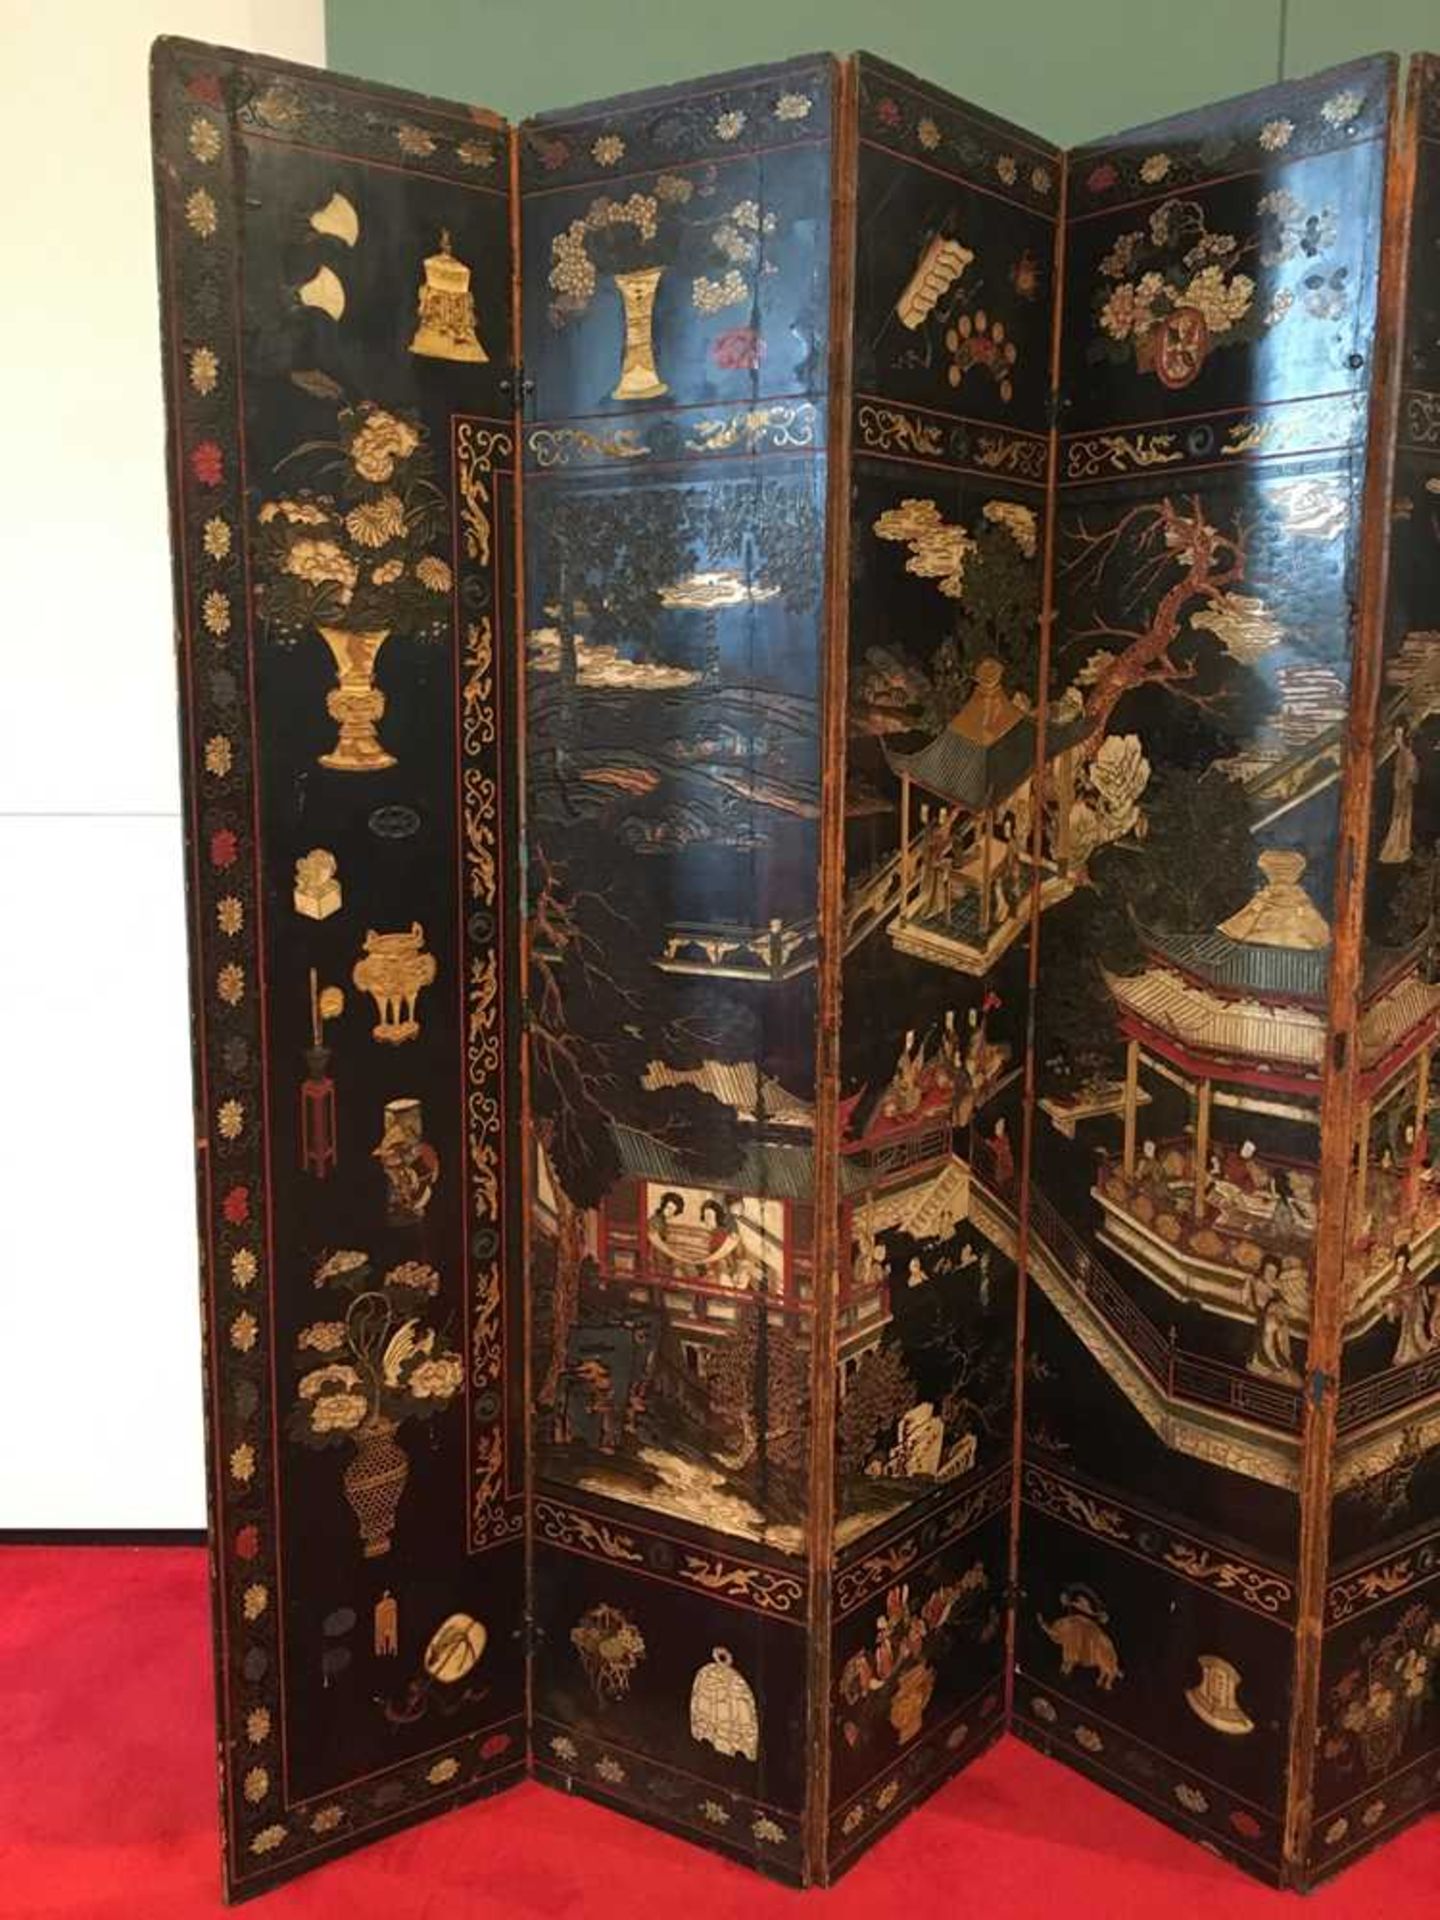 A CHINESE COROMANDEL BLACK LACQUER TWELVE-PANEL SCREEN QING DYNASTY, 18TH CENTURY - Image 23 of 72